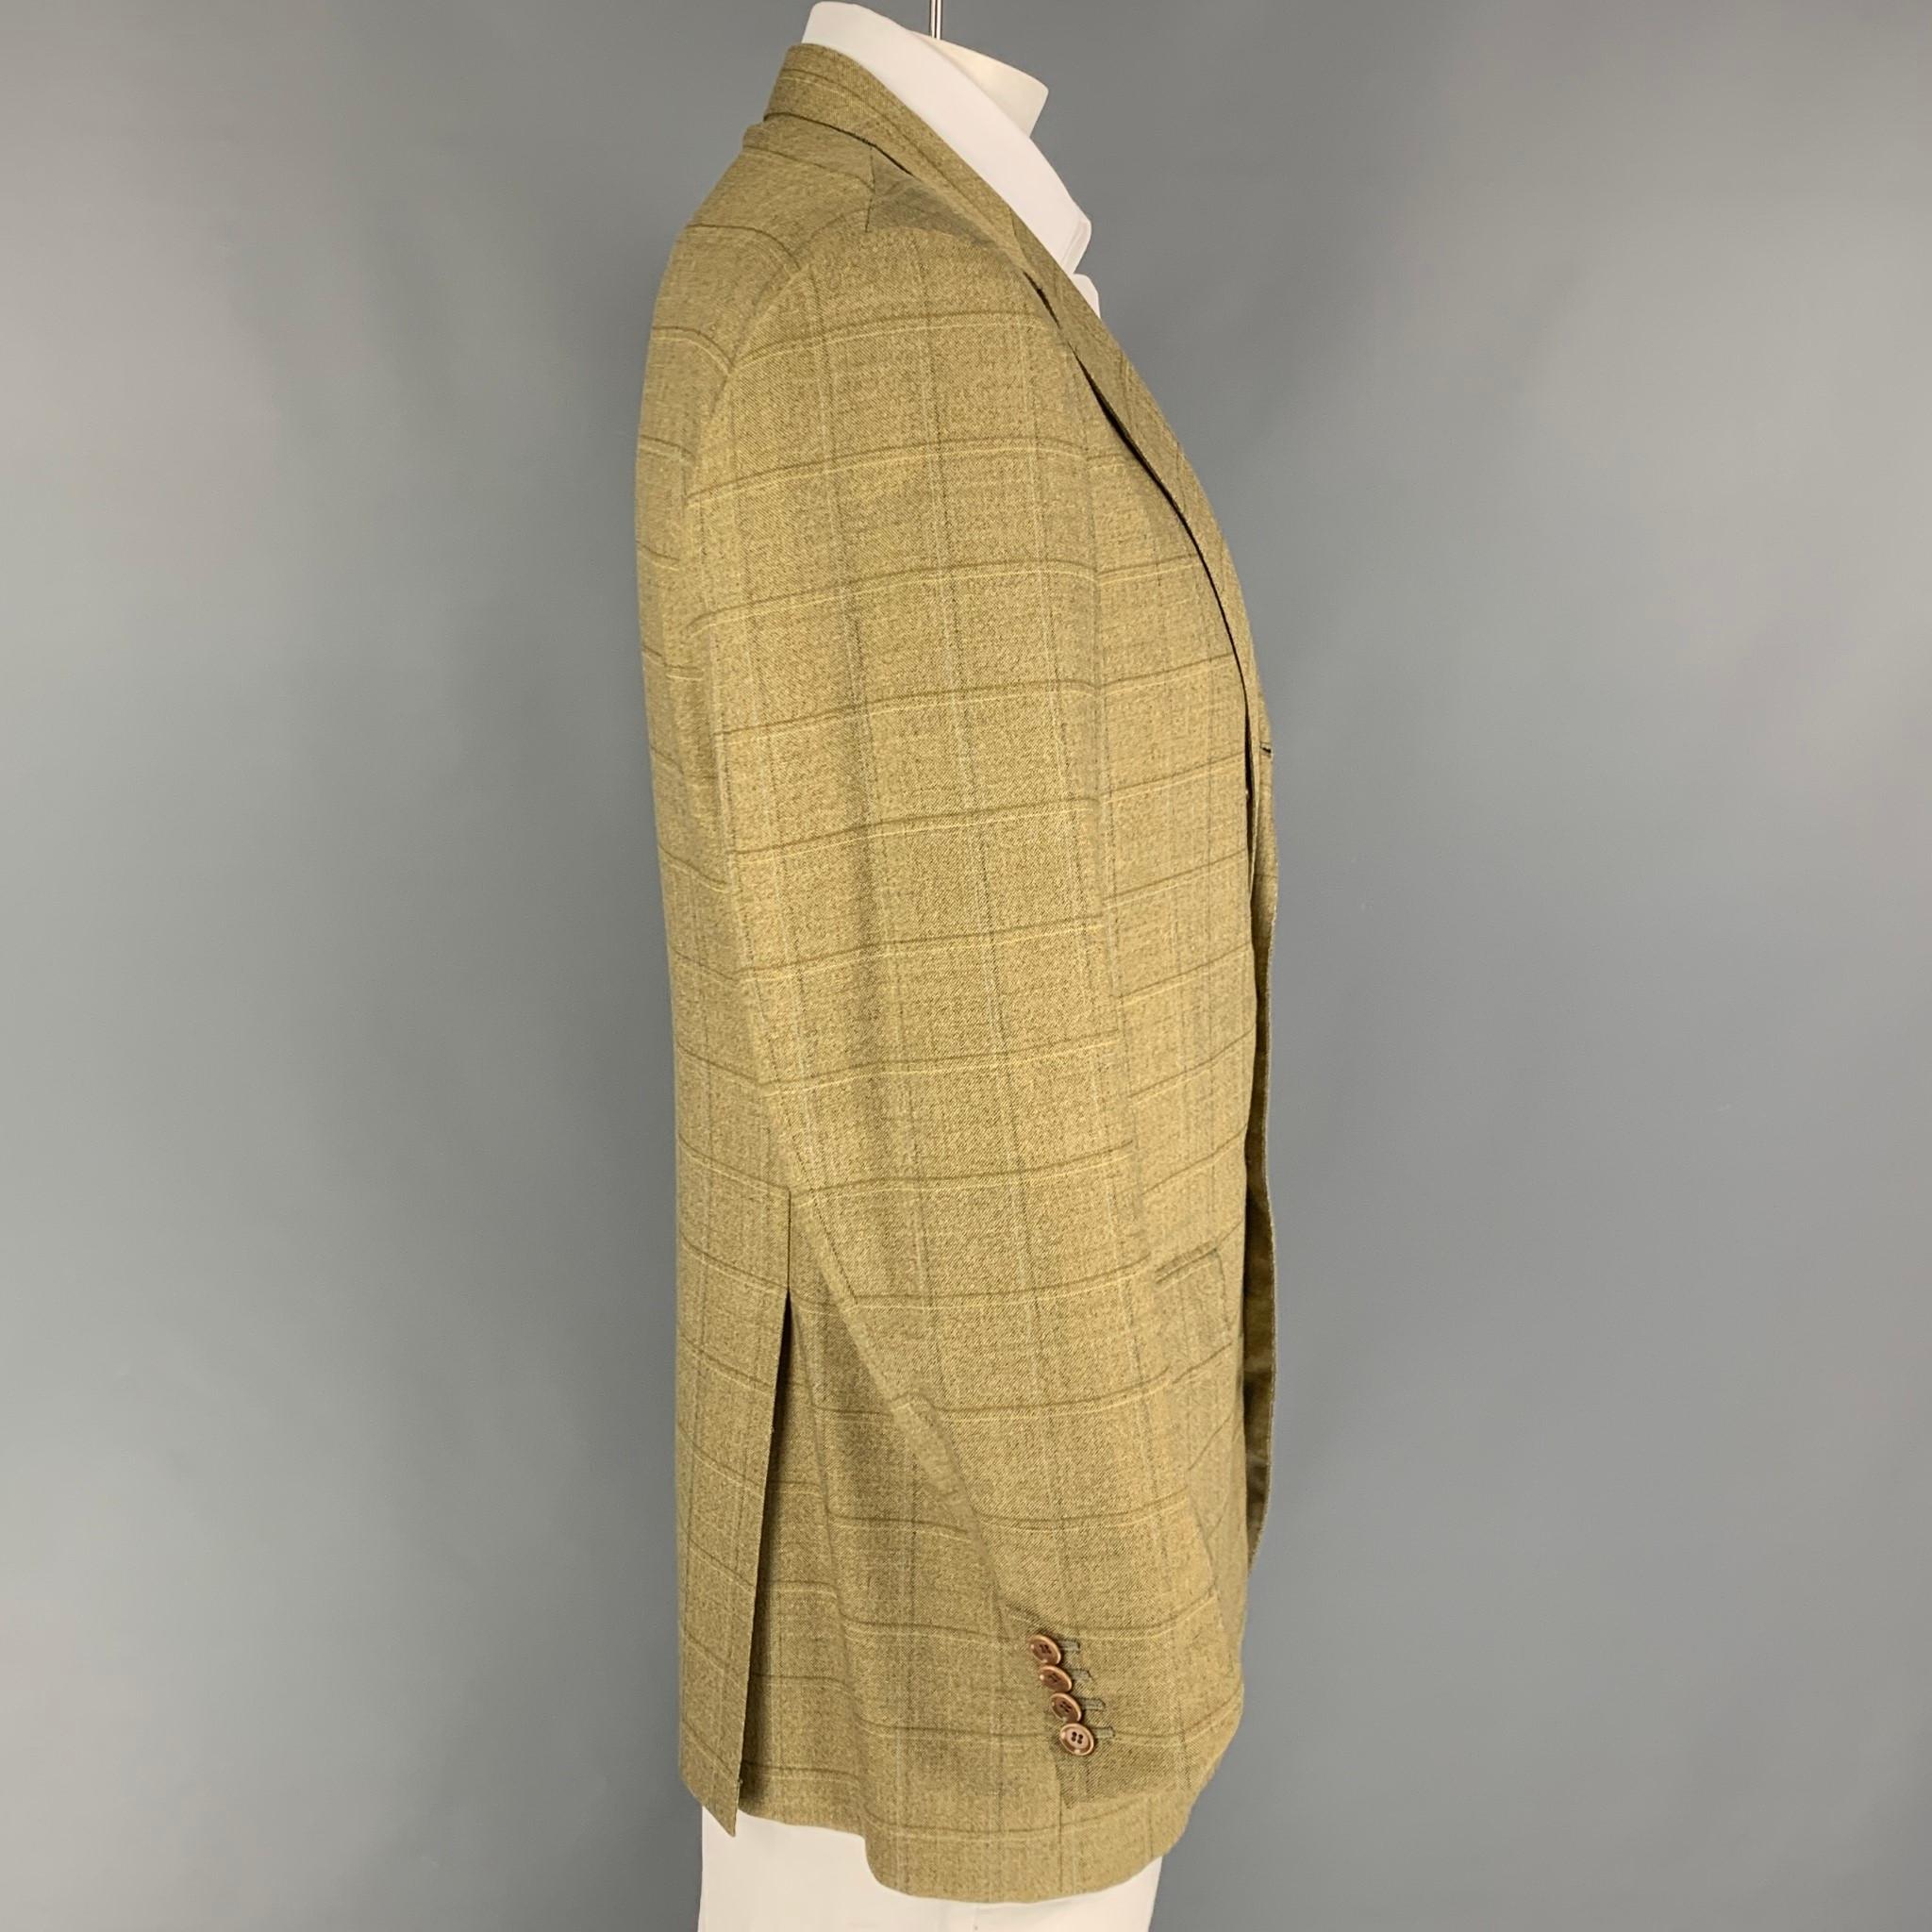 LUCIANO BARBERA sport coat comes in a yellow & olive window pane wool with a full liner featuring a notch lapel, flap pockets, double back vent, and a three button closure. Made in Italy. 

Very Good Pre-Owned Condition.
Marked: